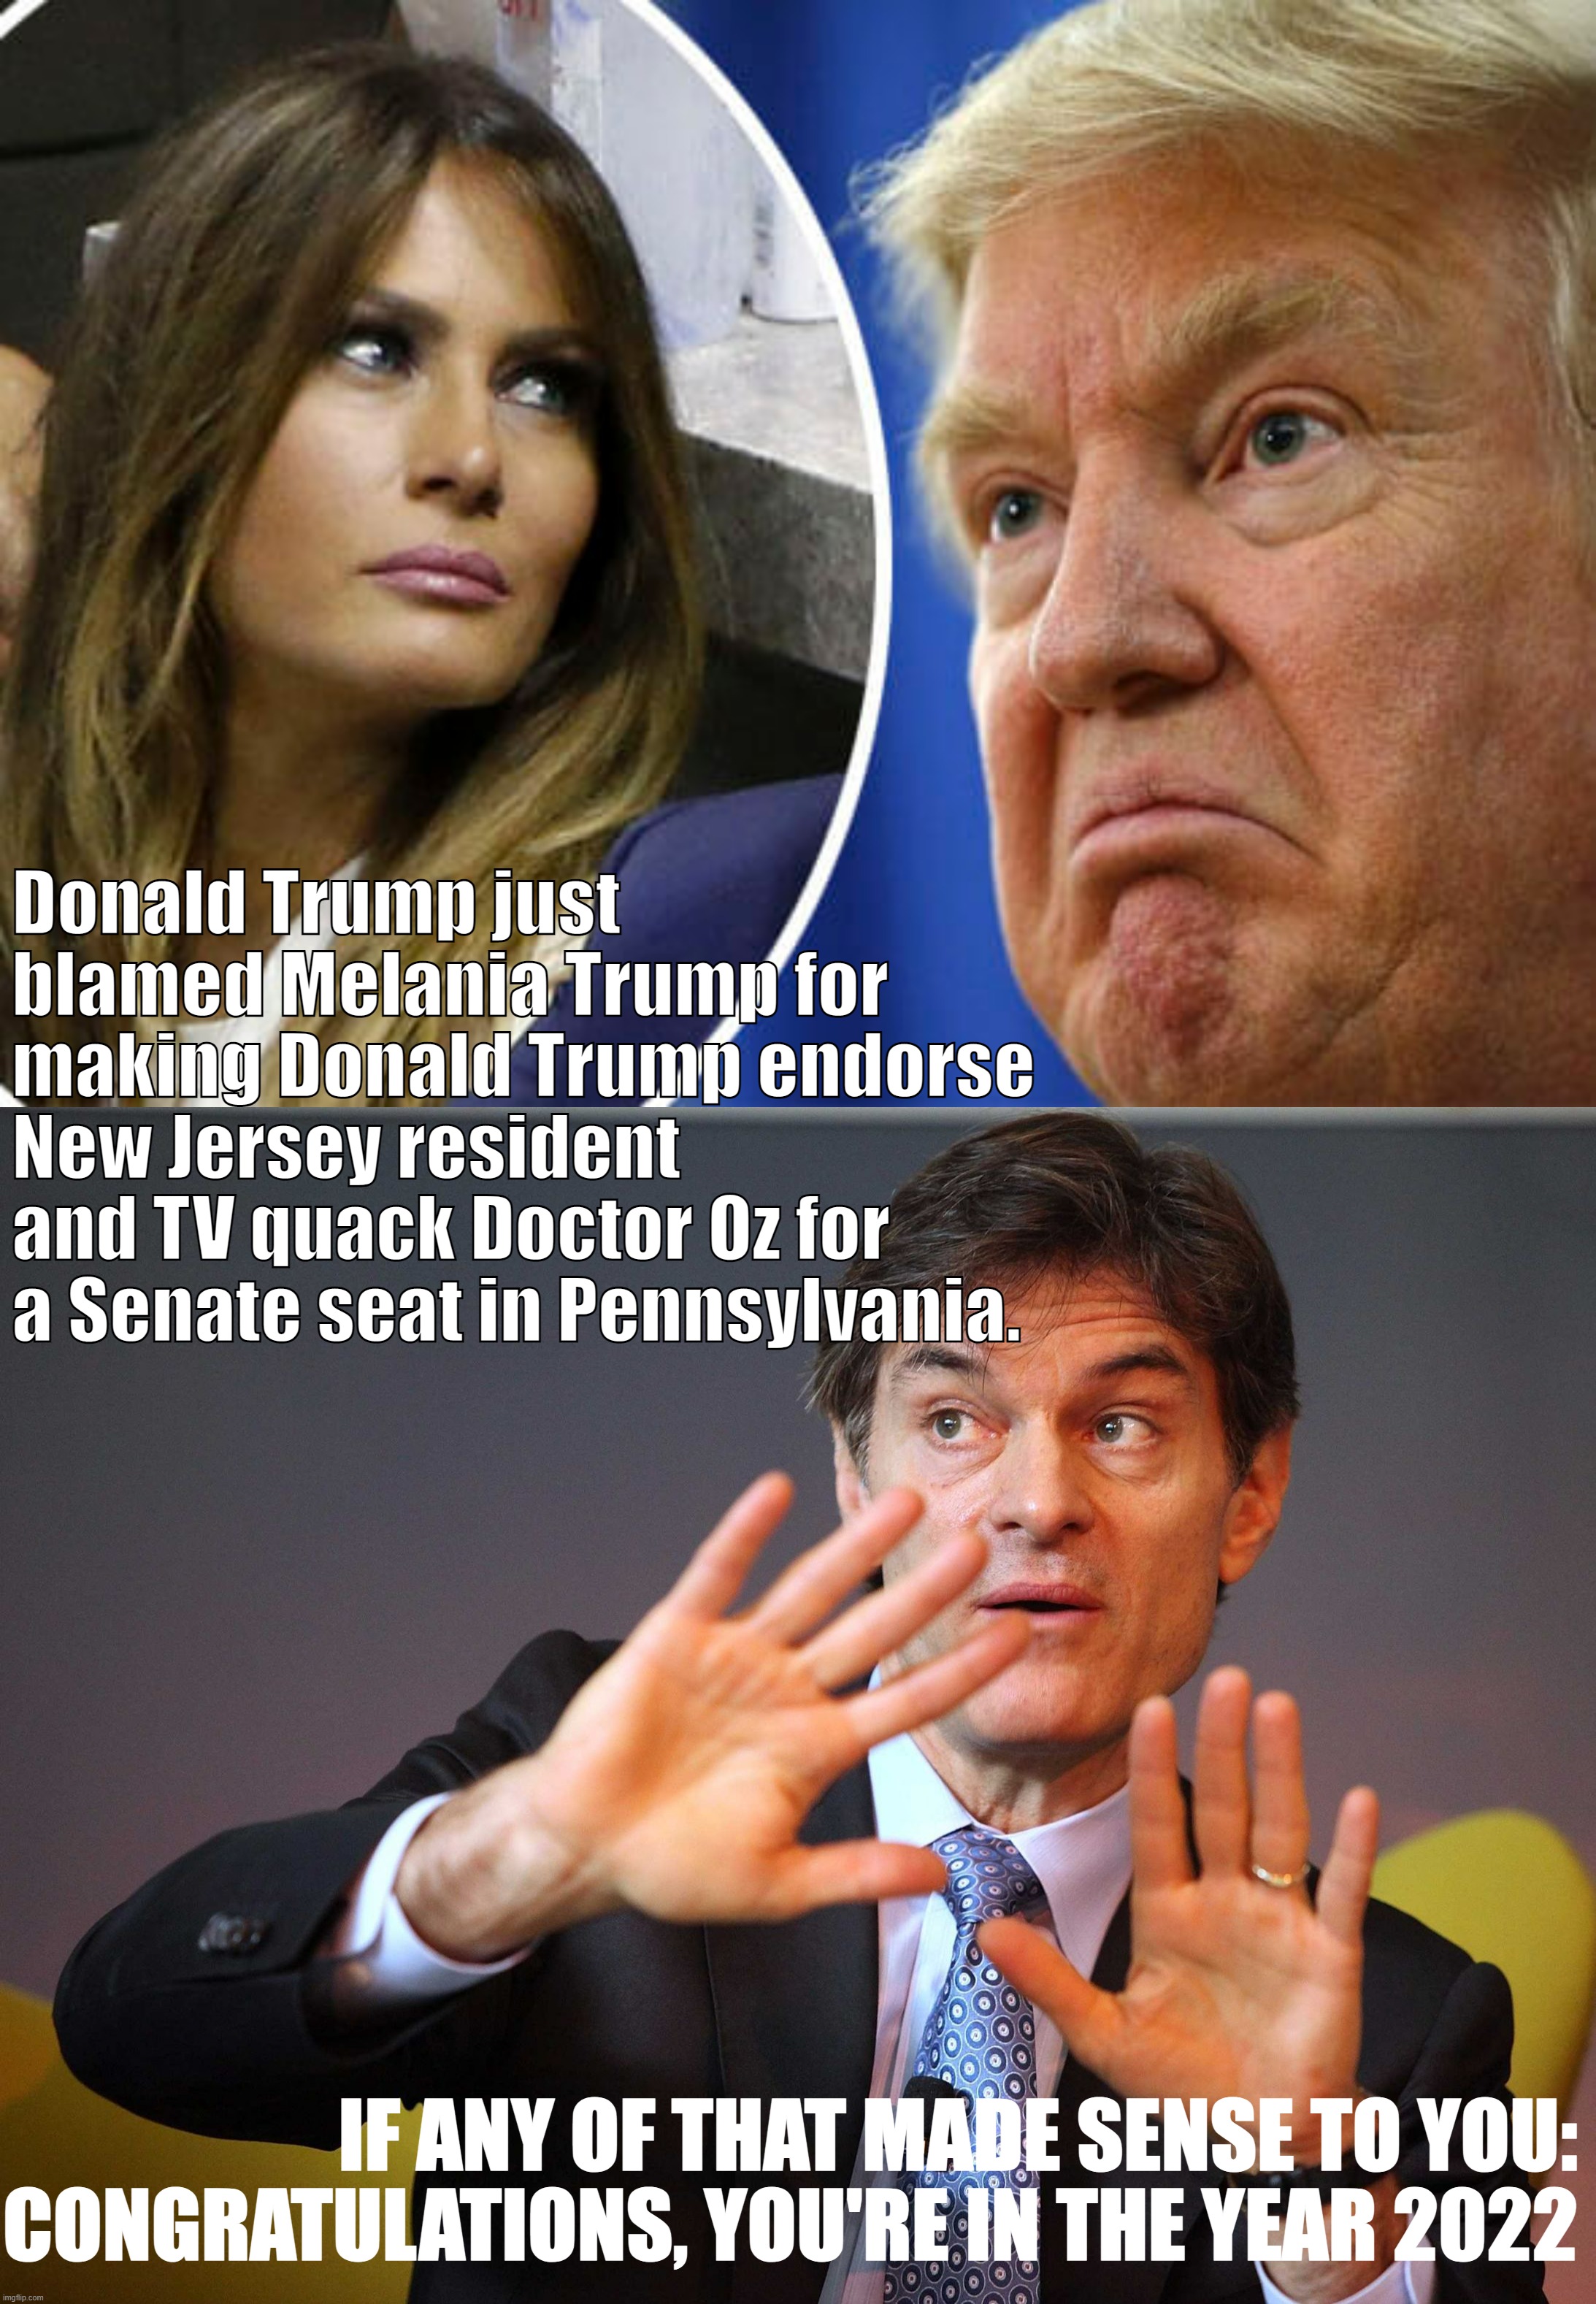 You follow? Okay, okay, good - you're up-to-speed | Donald Trump just blamed Melania Trump for making Donald Trump endorse New Jersey resident and TV quack Doctor Oz for a Senate seat in Pennsylvania. IF ANY OF THAT MADE SENSE TO YOU: CONGRATULATIONS, YOU'RE IN THE YEAR 2022 | image tagged in trump and melania,dr oz,donald trump,melania trump,2022,midterms | made w/ Imgflip meme maker